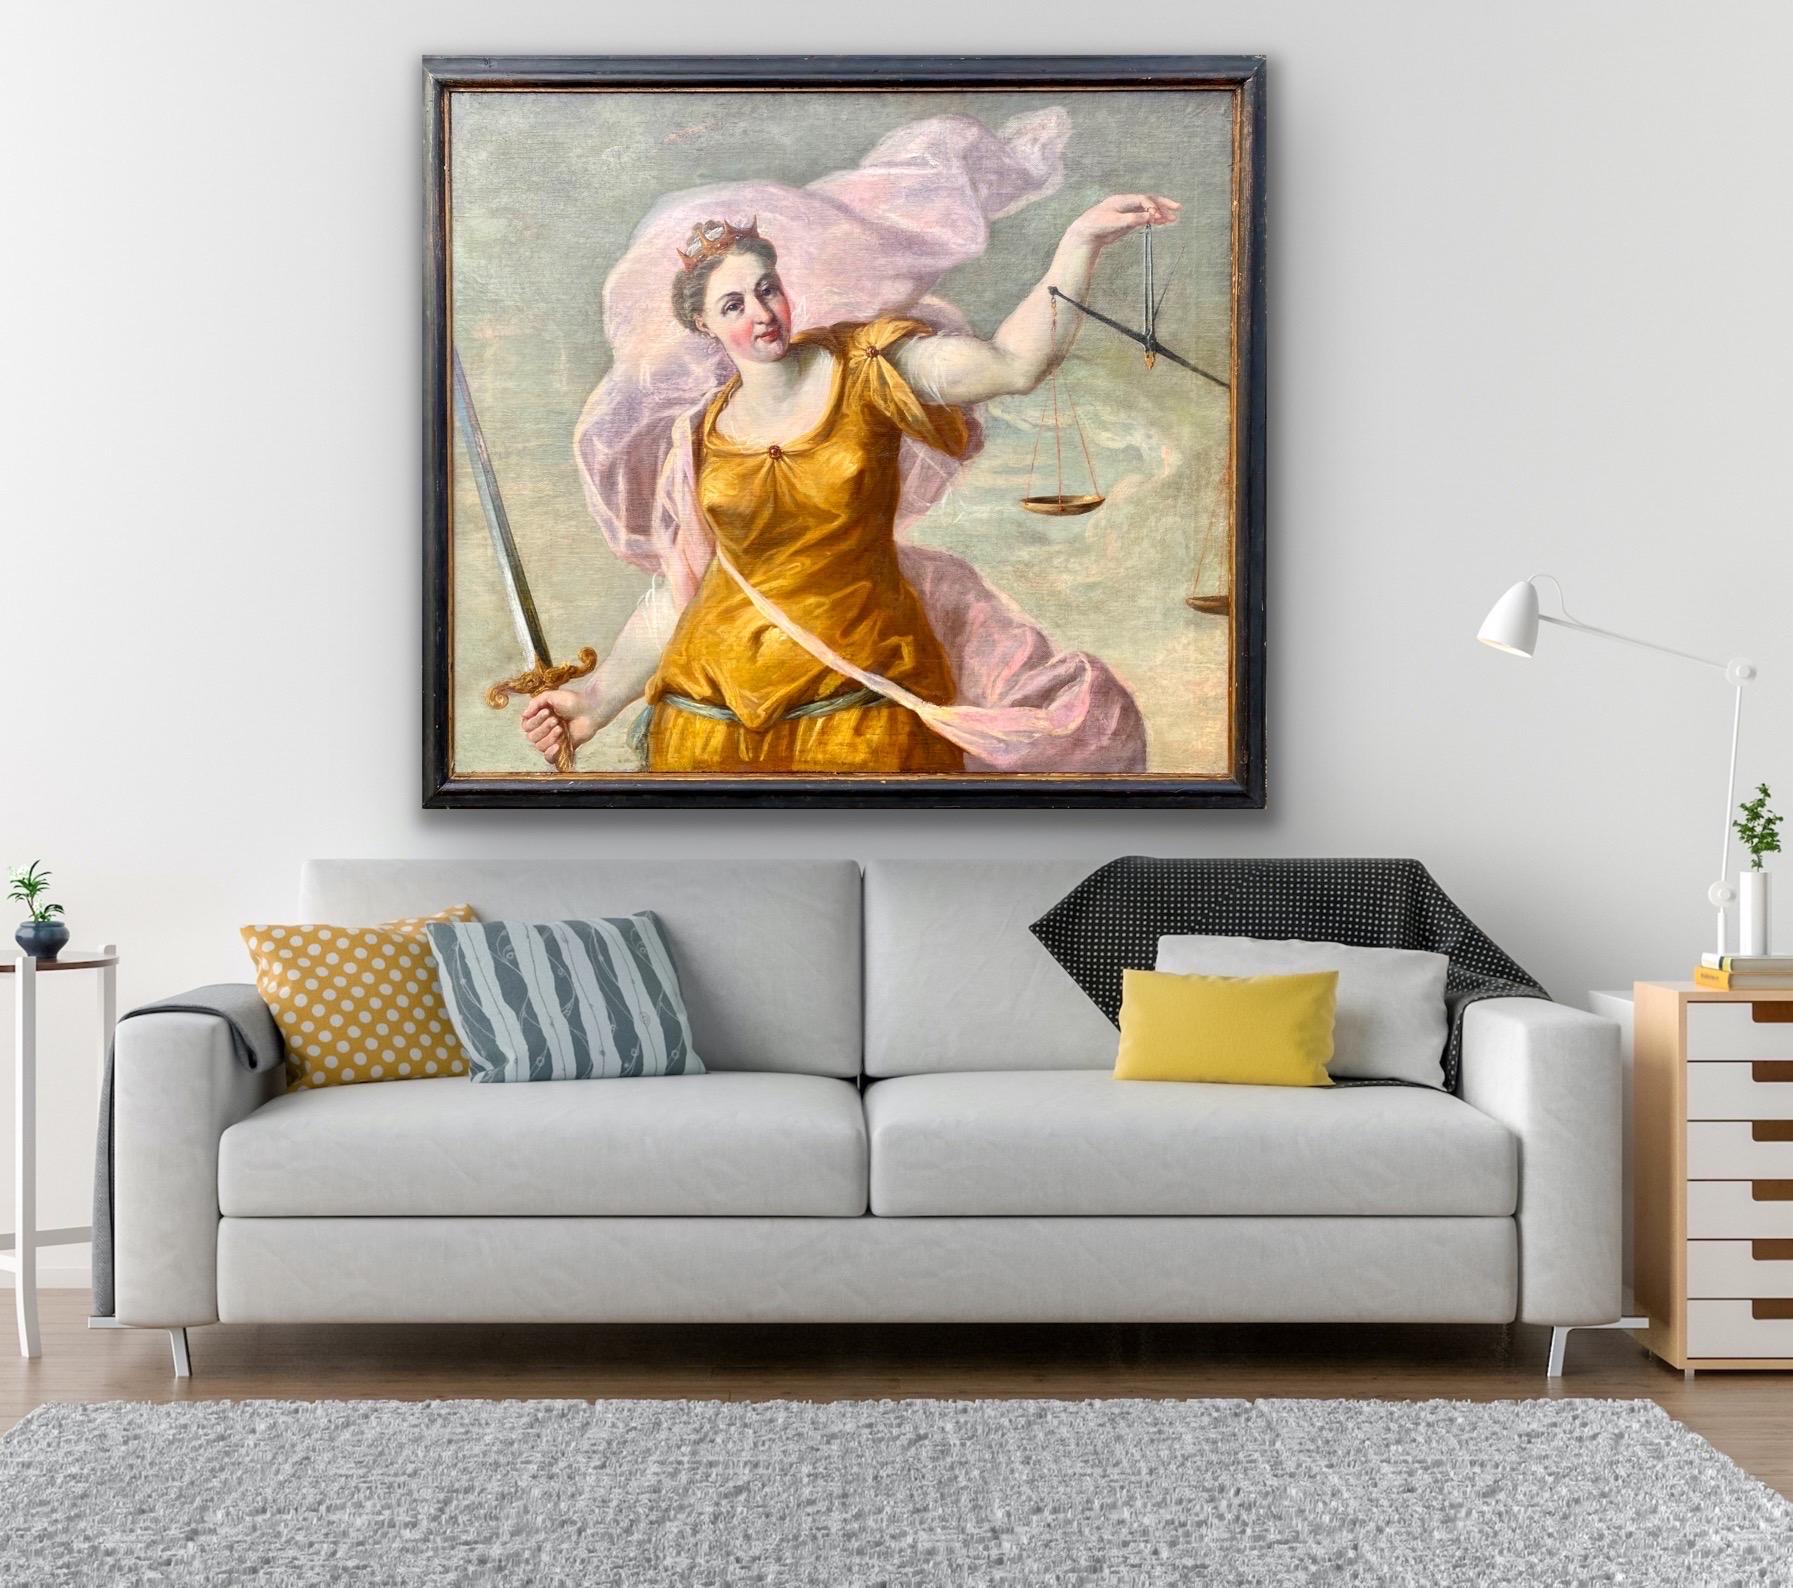 Huge 17th century Italian old master painting - Justitia - Lady Justice 6